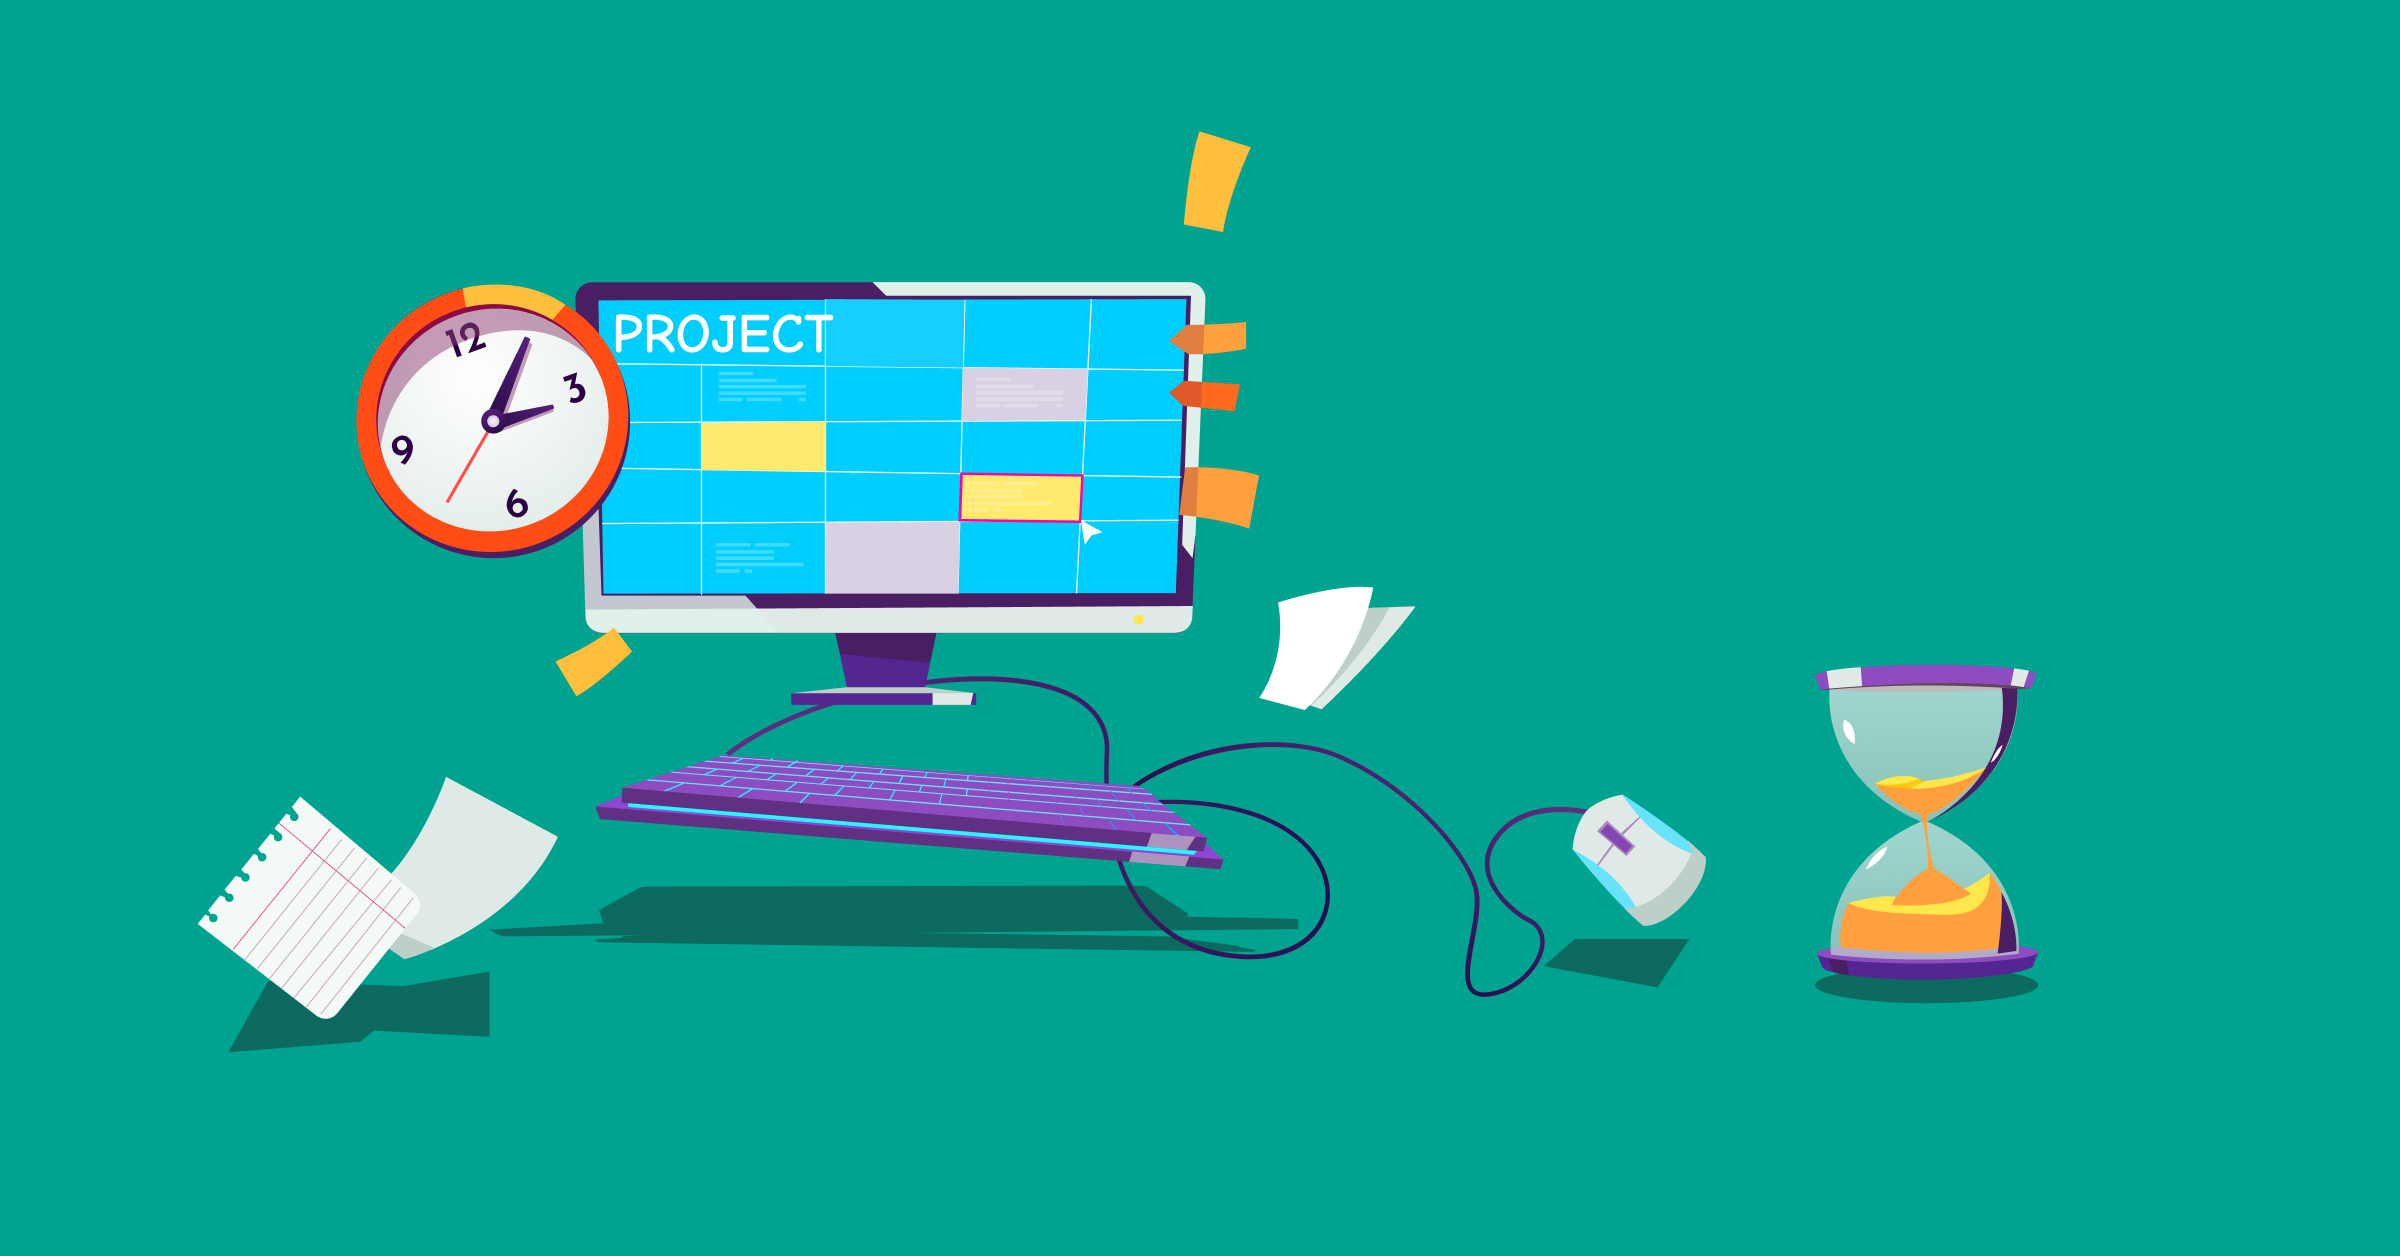 6 Tips to Keep Any Client Project on Track